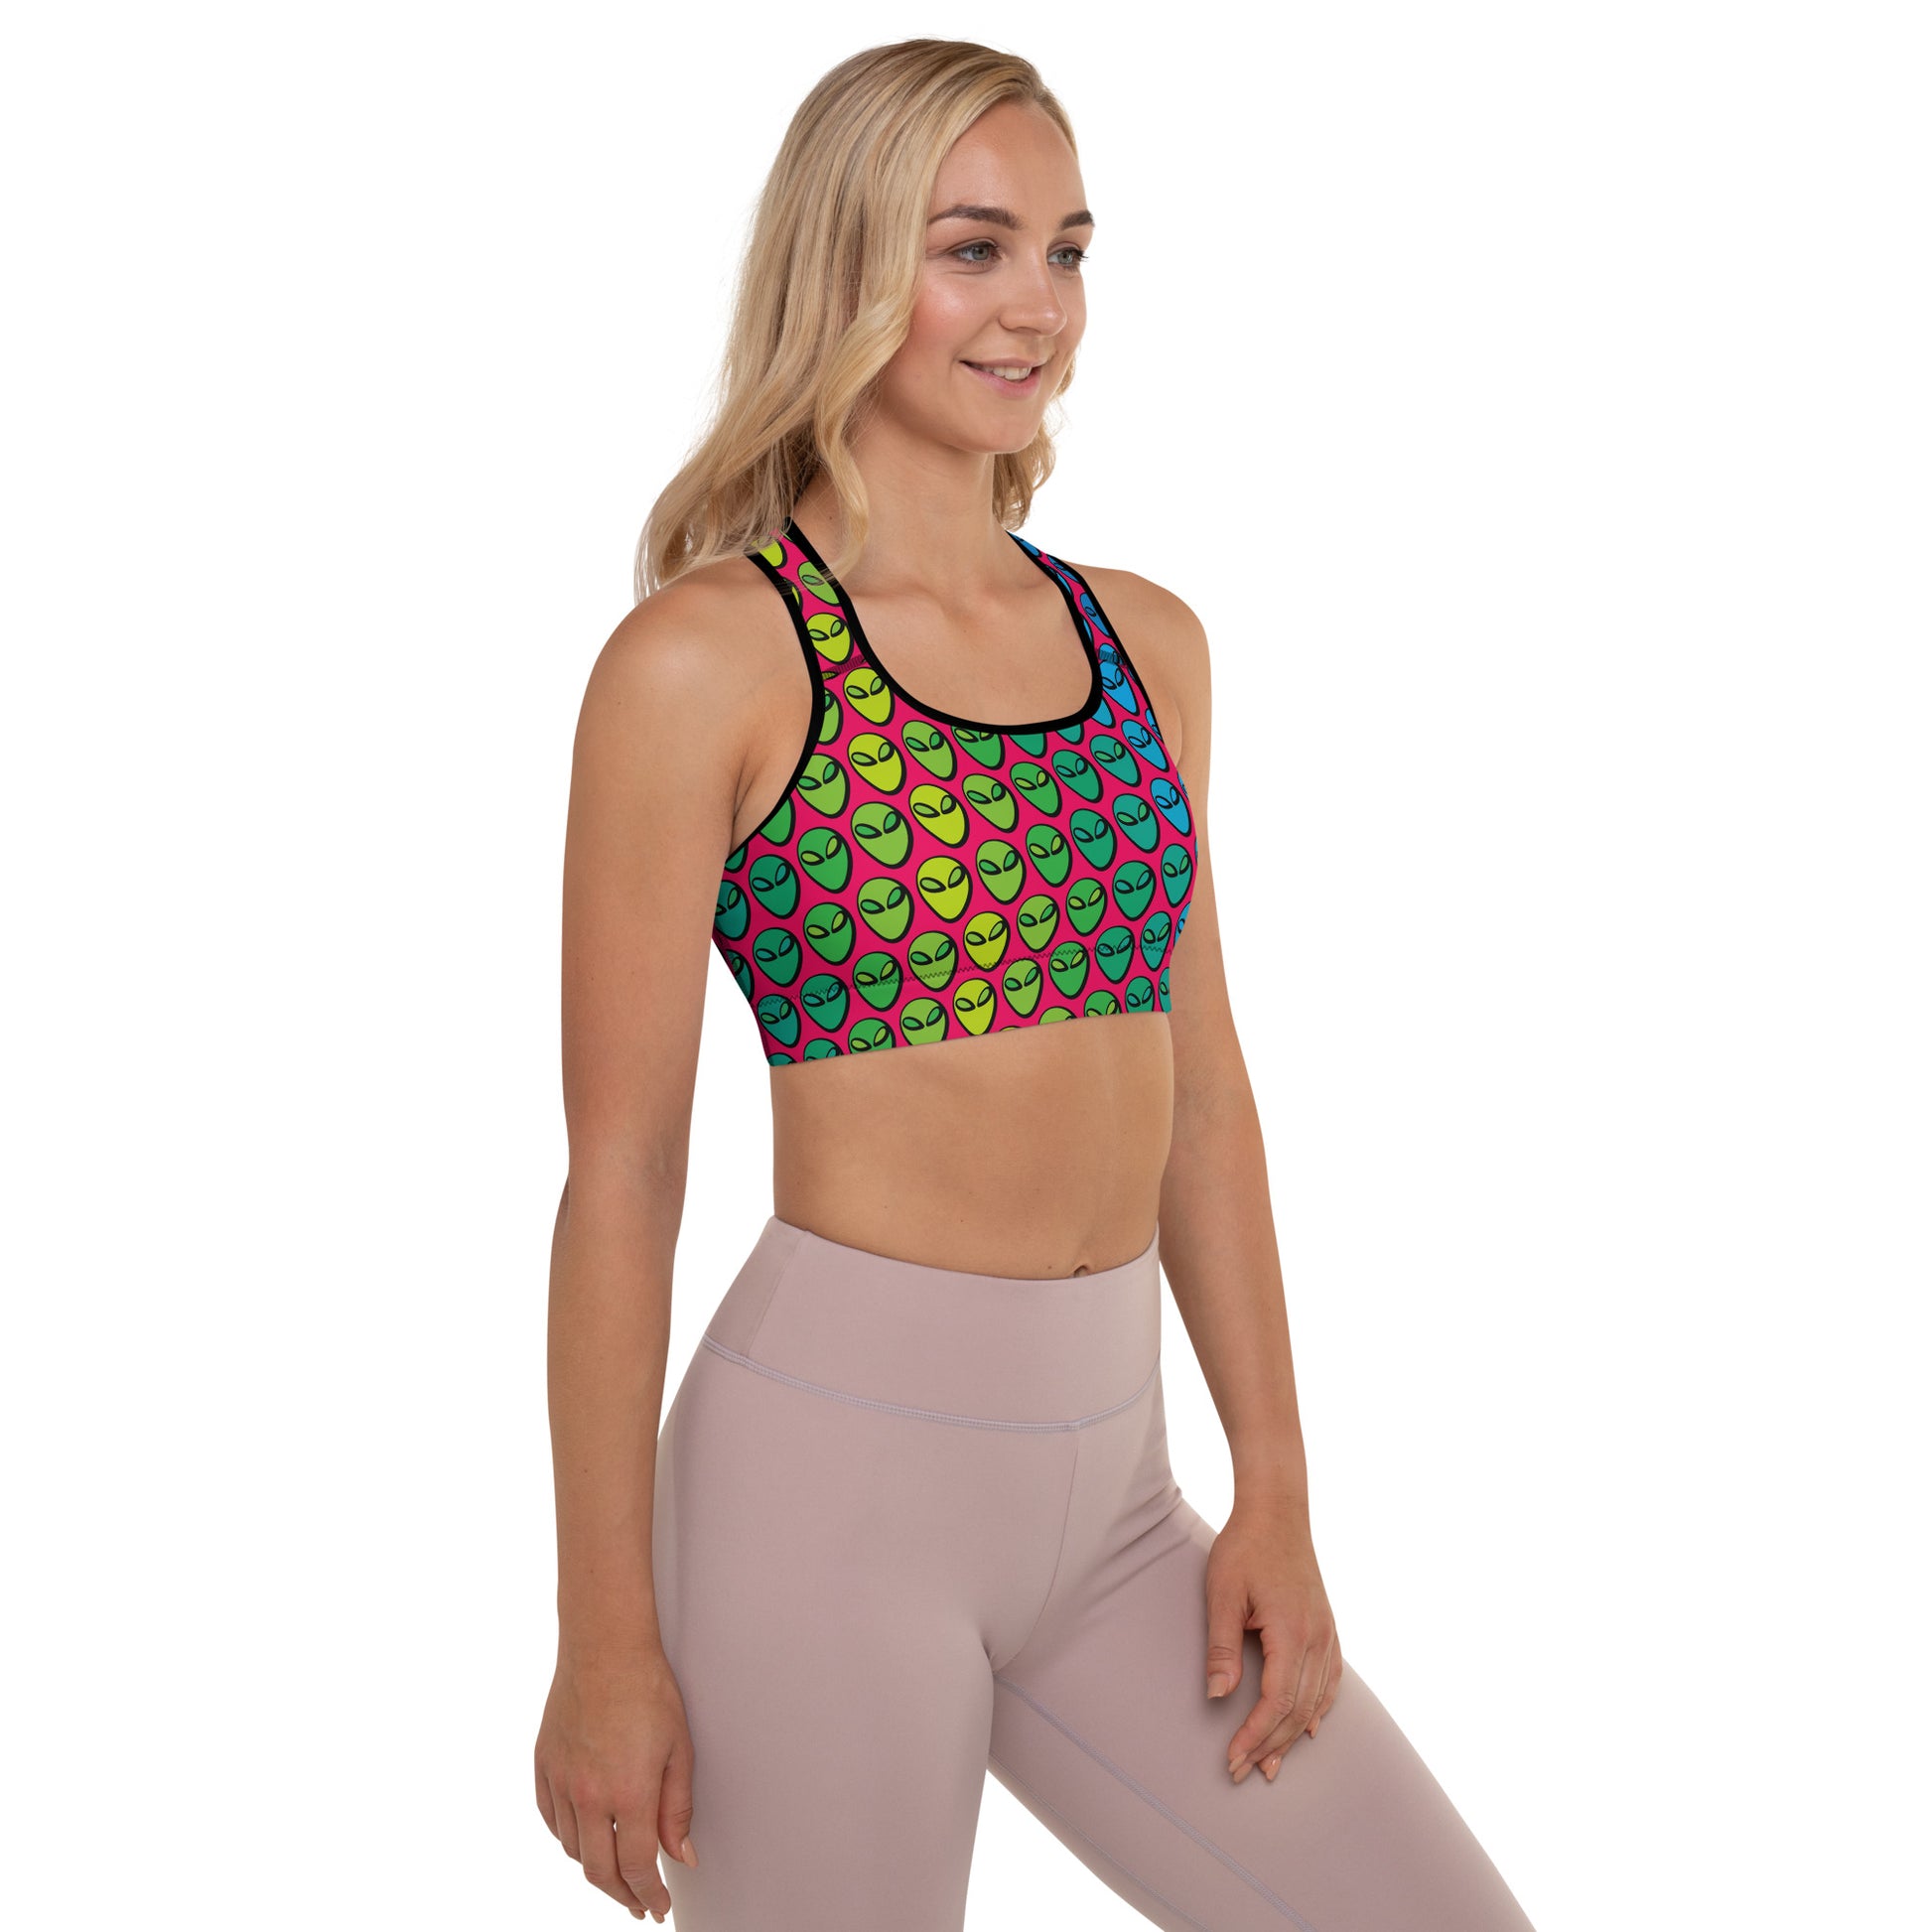 Weirdo | This padded sports bra is specially designed for you weirdos who know that aliens are real! The sports bra has alien heads printed in colors all over.